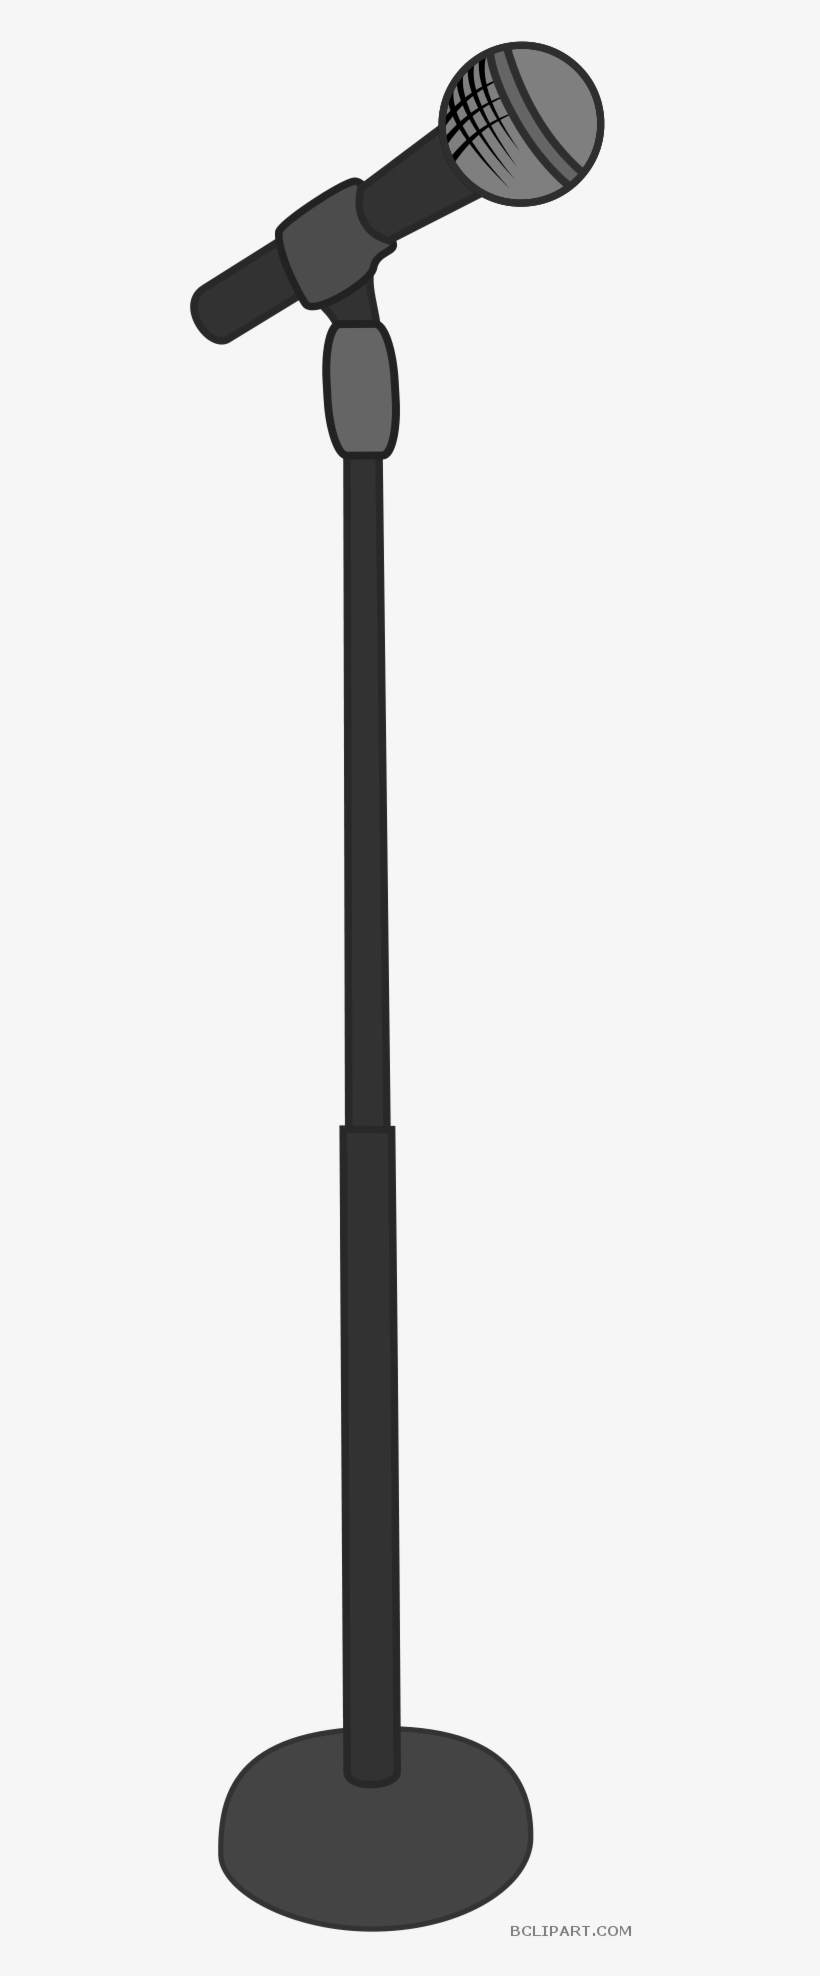 Microphone Stand Clipart - Microphone With Stand Clipart, transparent png #9632799